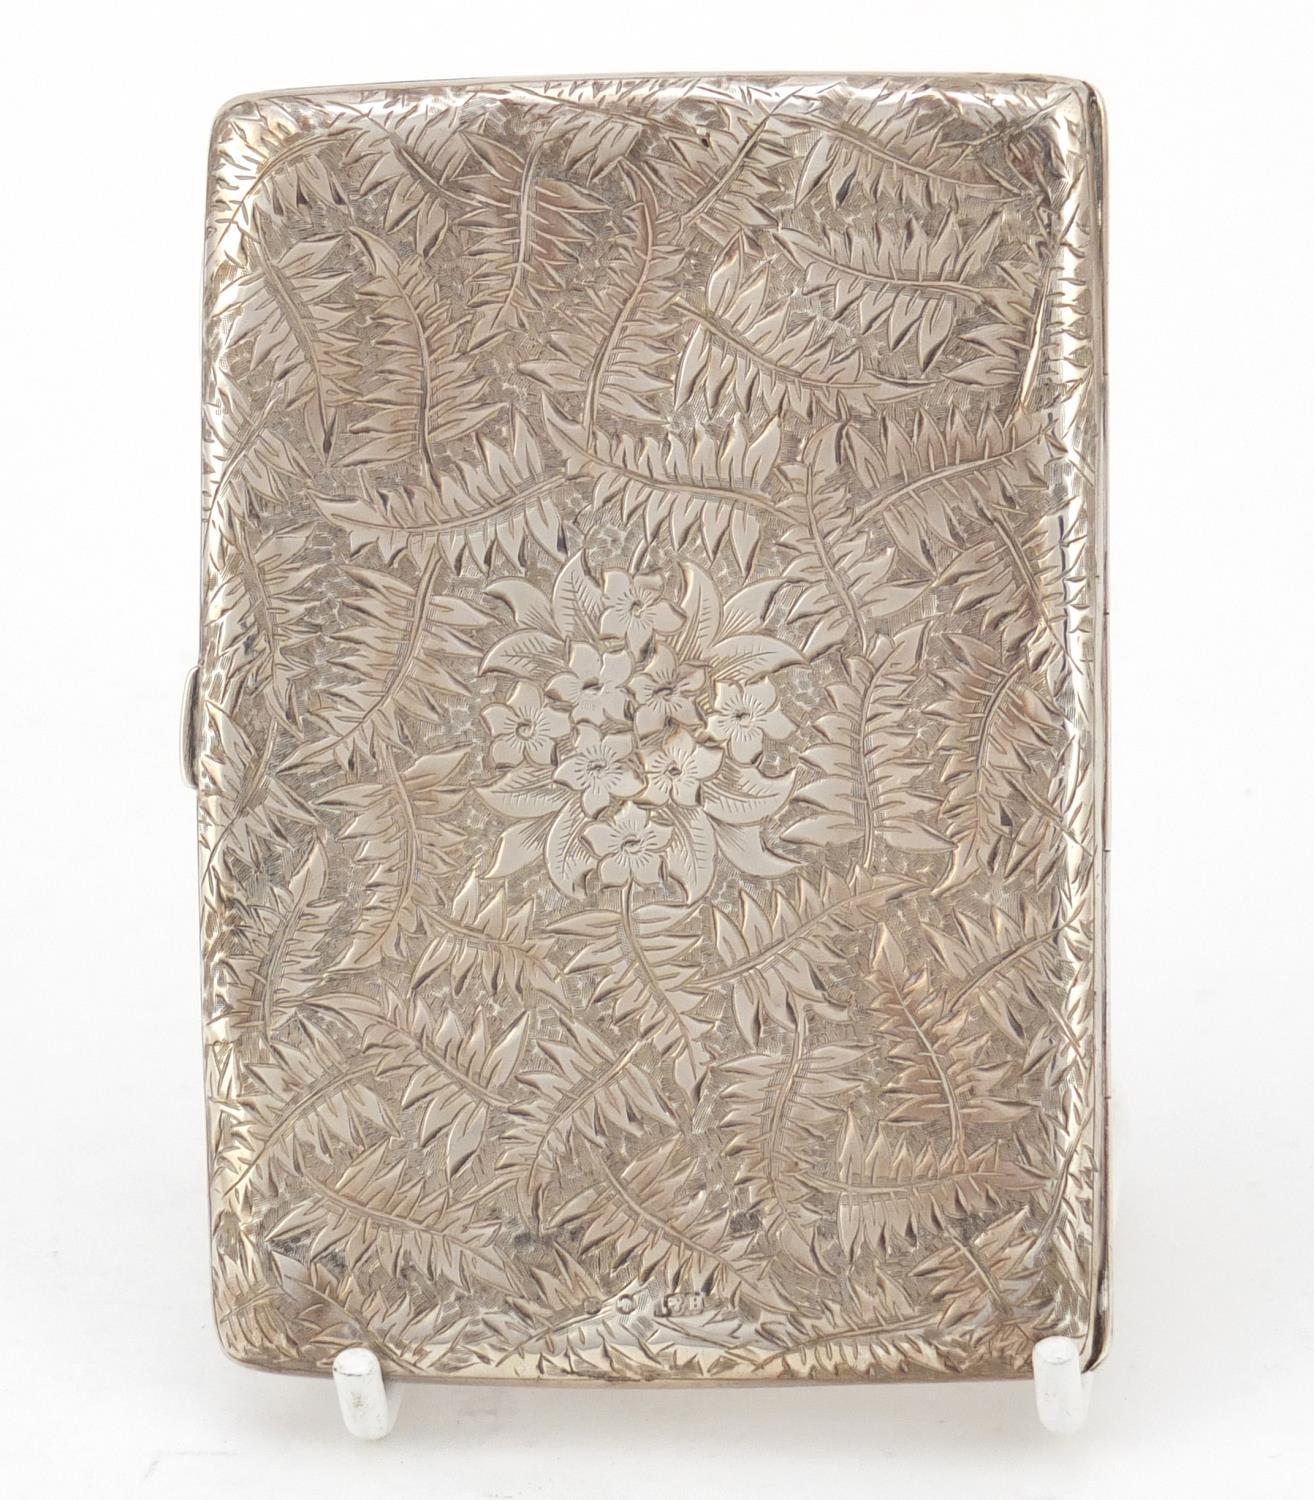 Victorian silver concertina card case, by Hilliard & Thomason, engraved and embossed with ferns, - Image 8 of 8